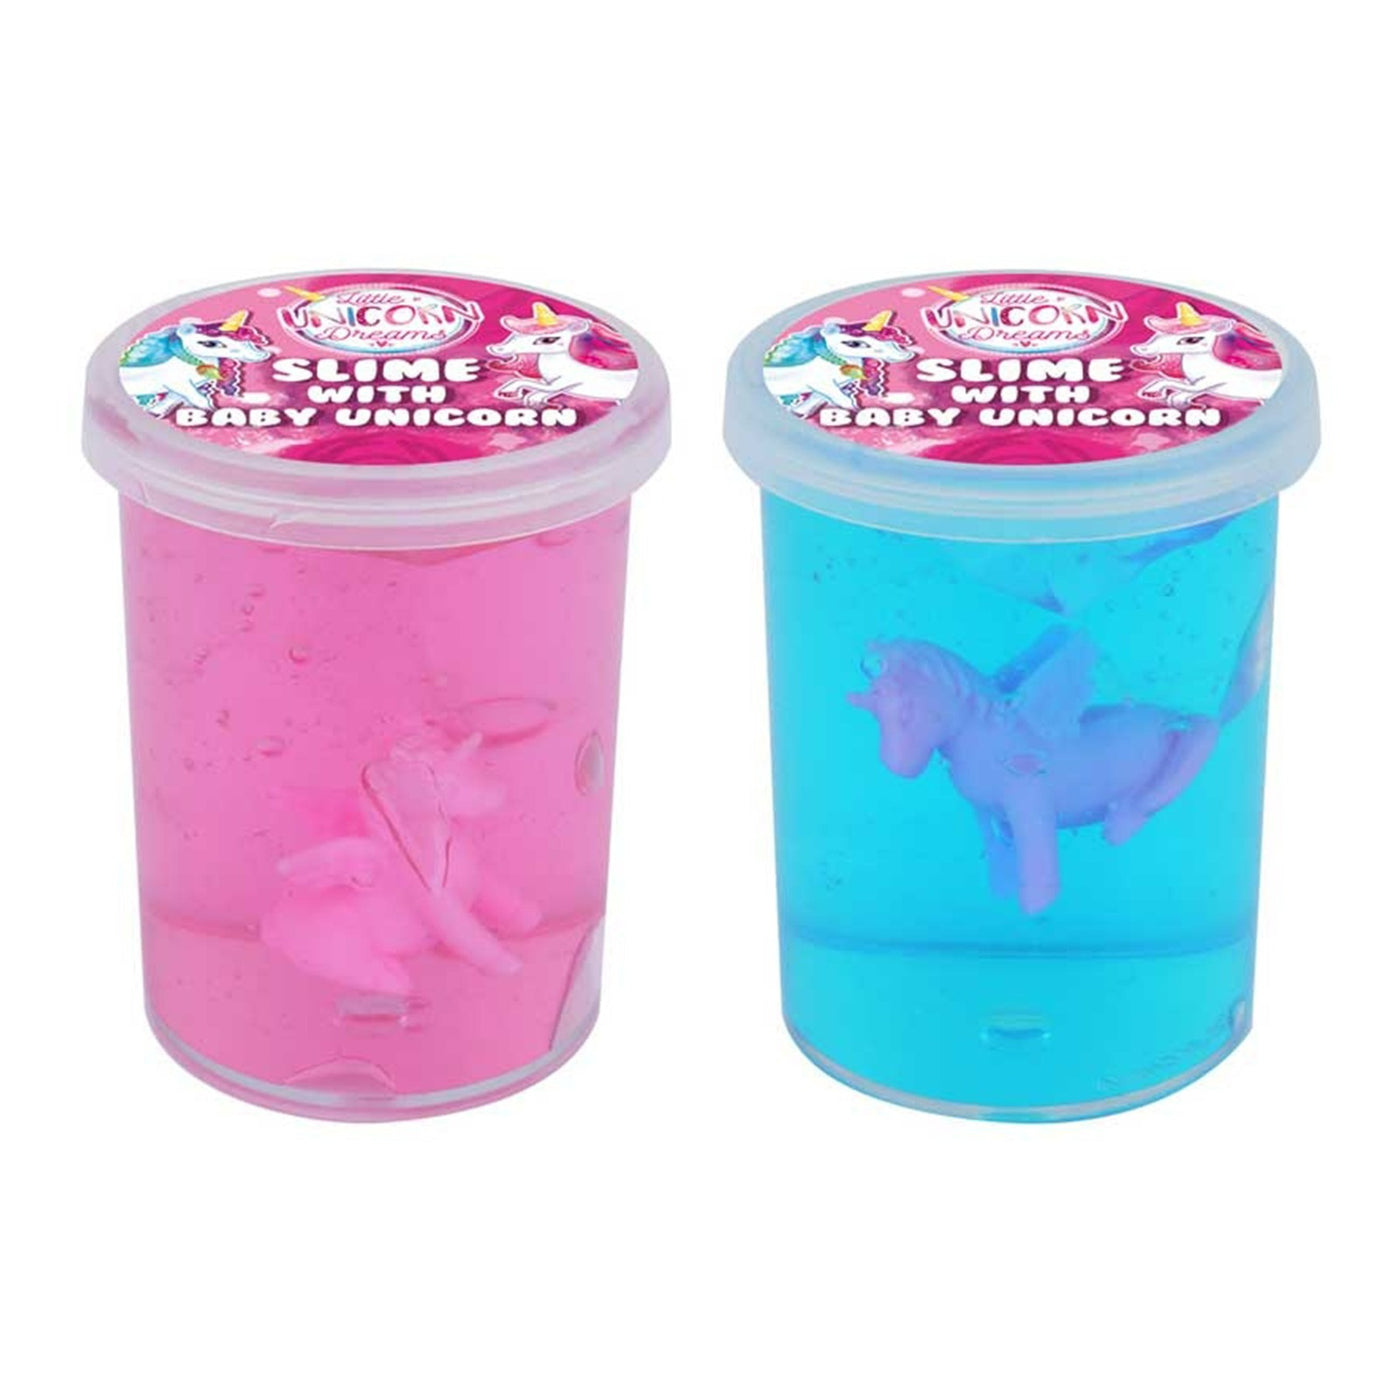 Pre Filled Slime Party Bags For Girls, Party Favours Unicorn Slime Gift Bag Pre Packed In Iridescent Pink Gift Bags